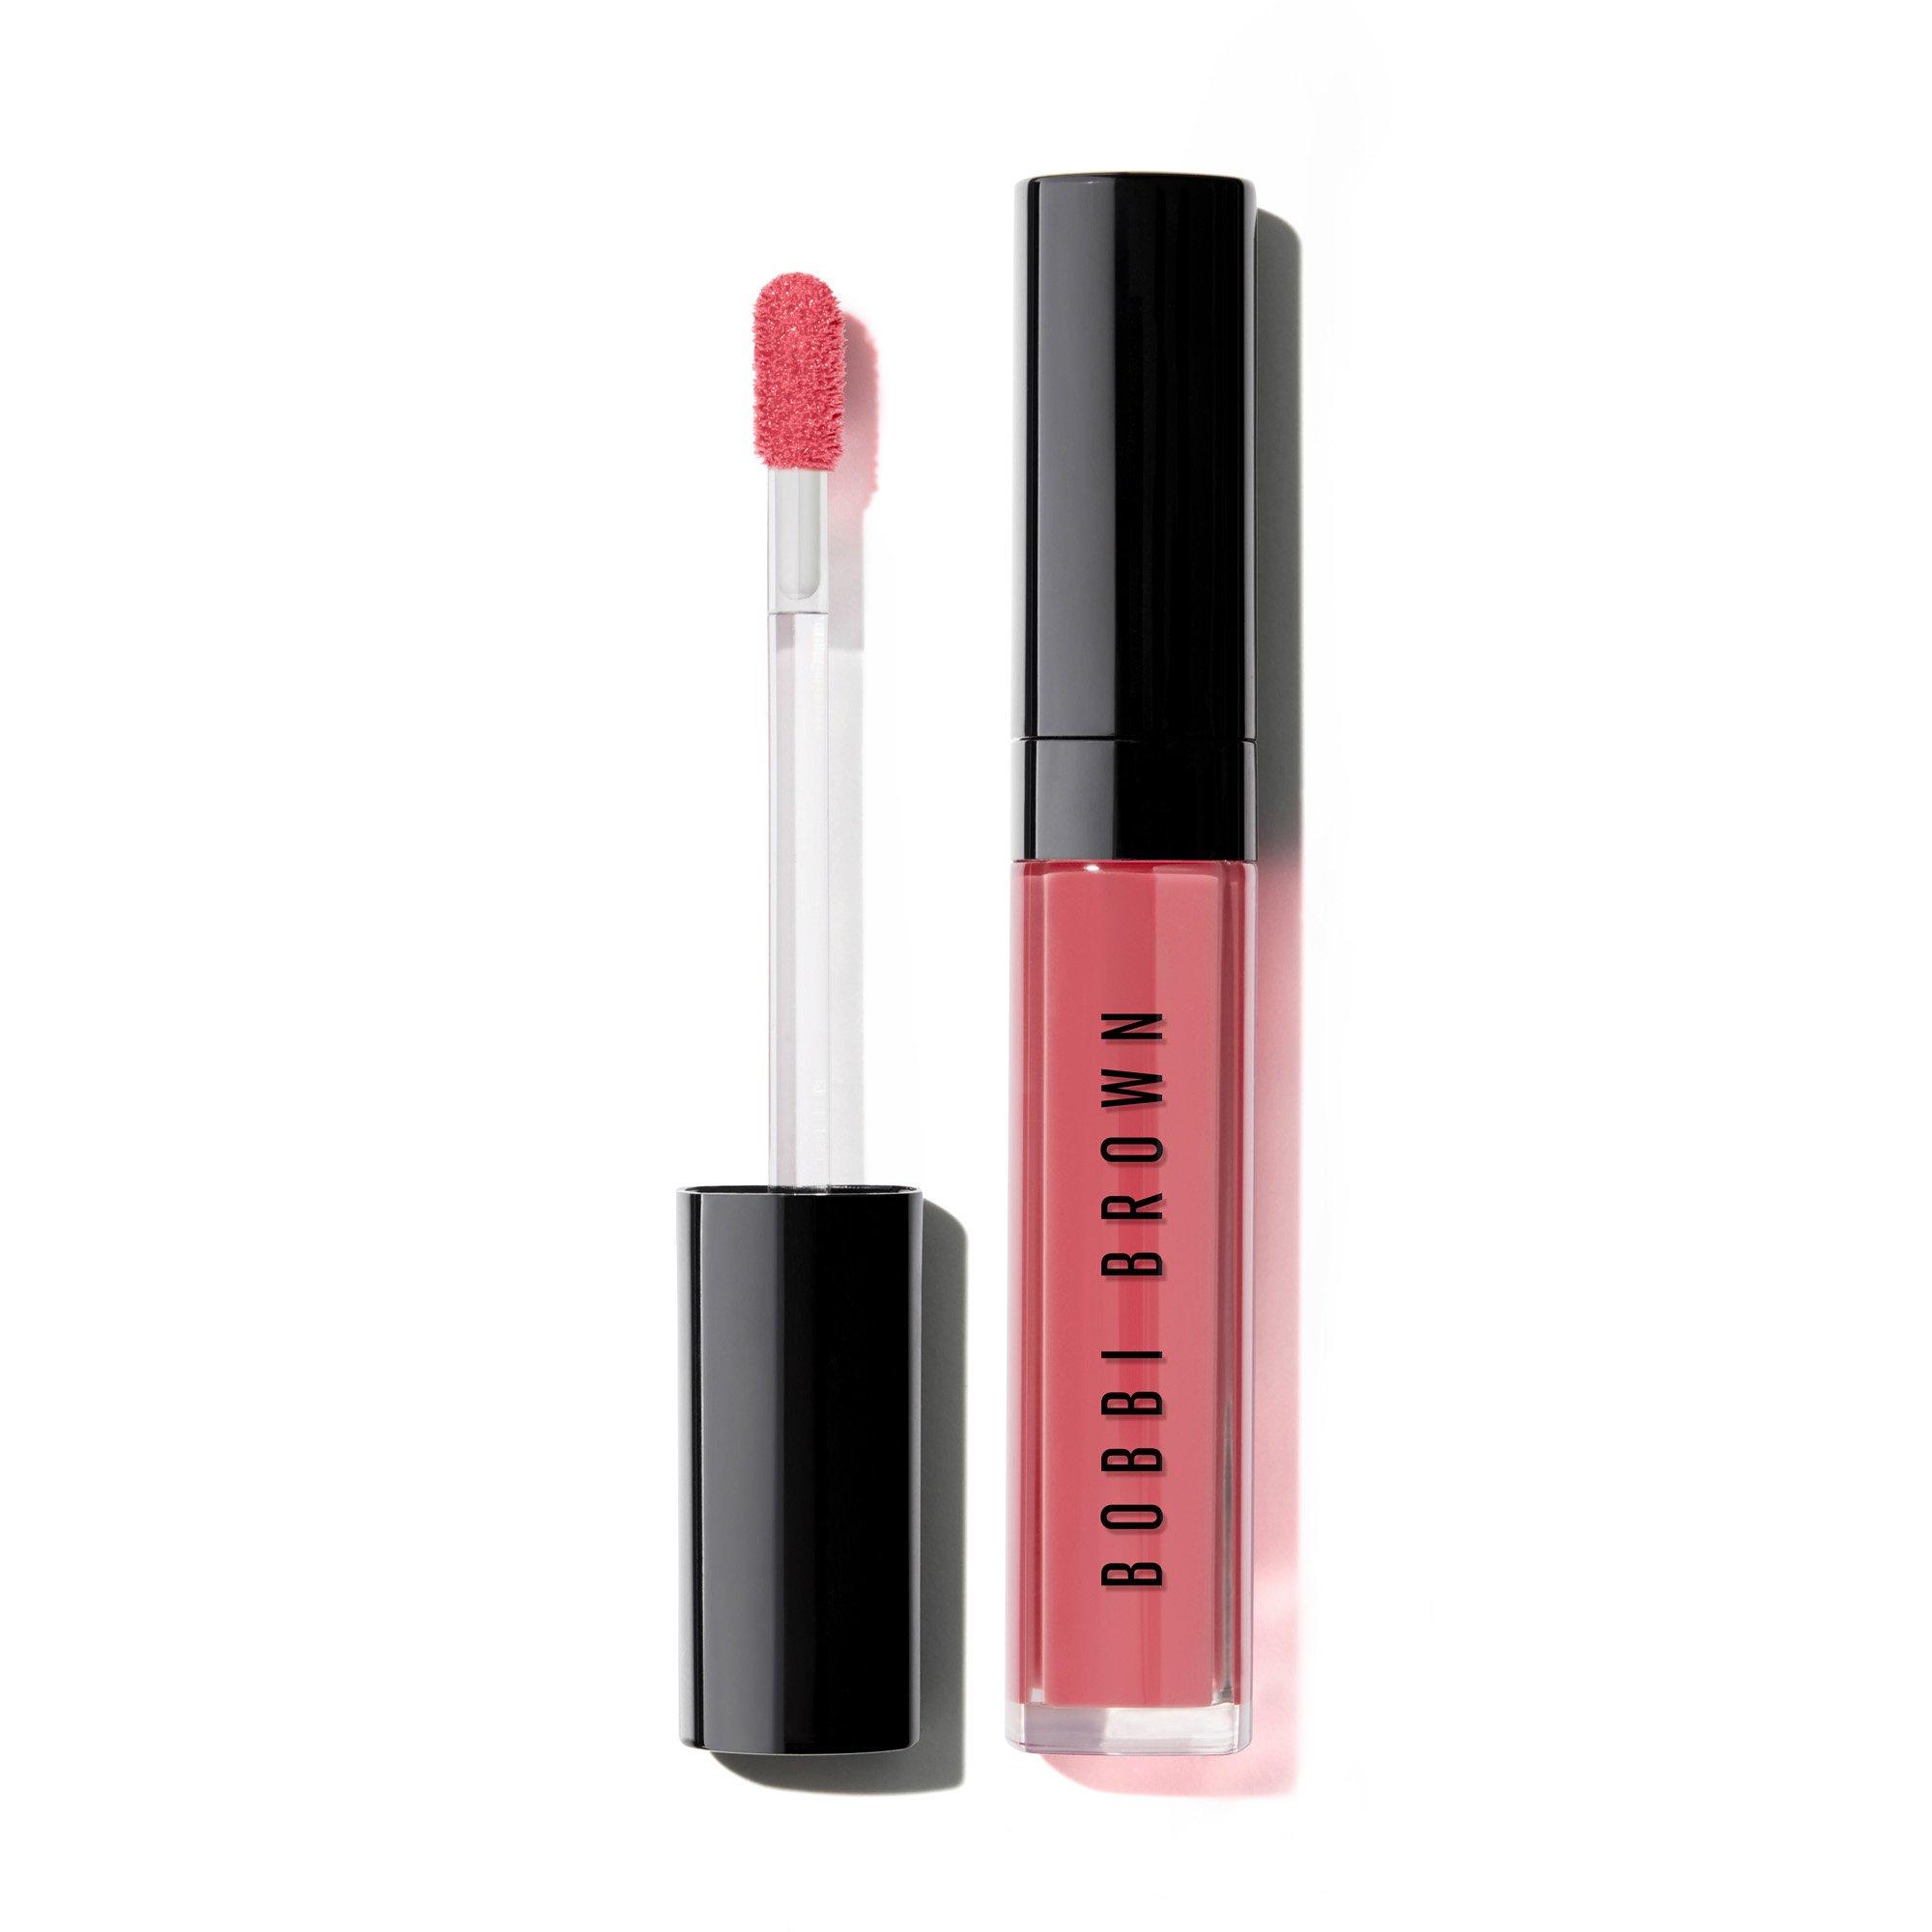 Bobbi Brown - Crushed Oil-Infused Gloss - Love Letter